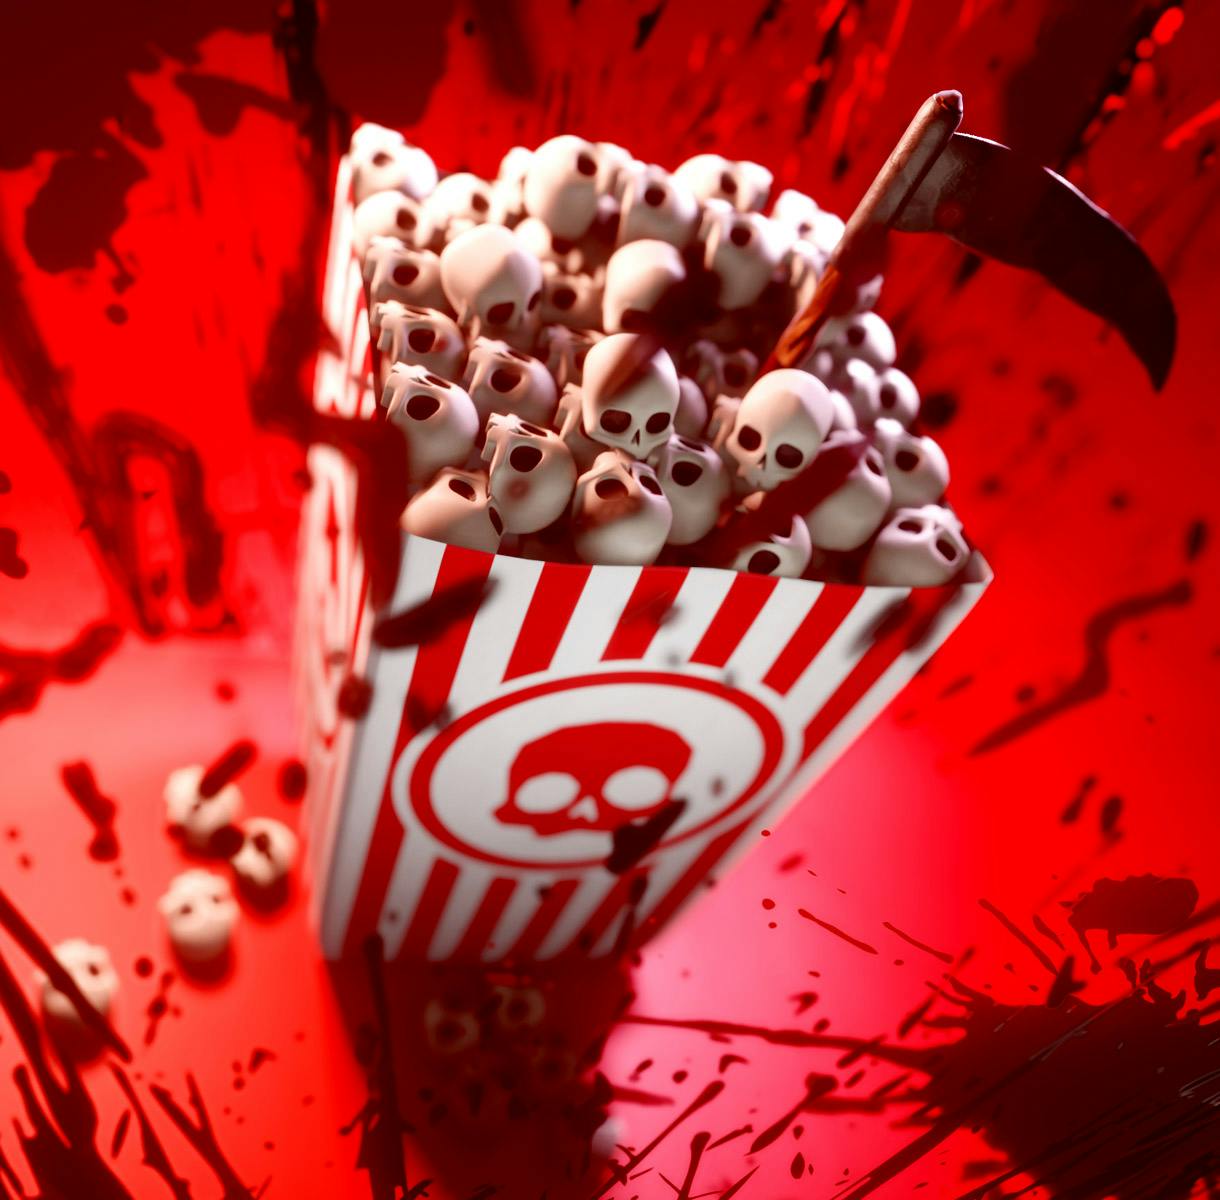 Dead Northern brings the pop corn to our pop-up cinema